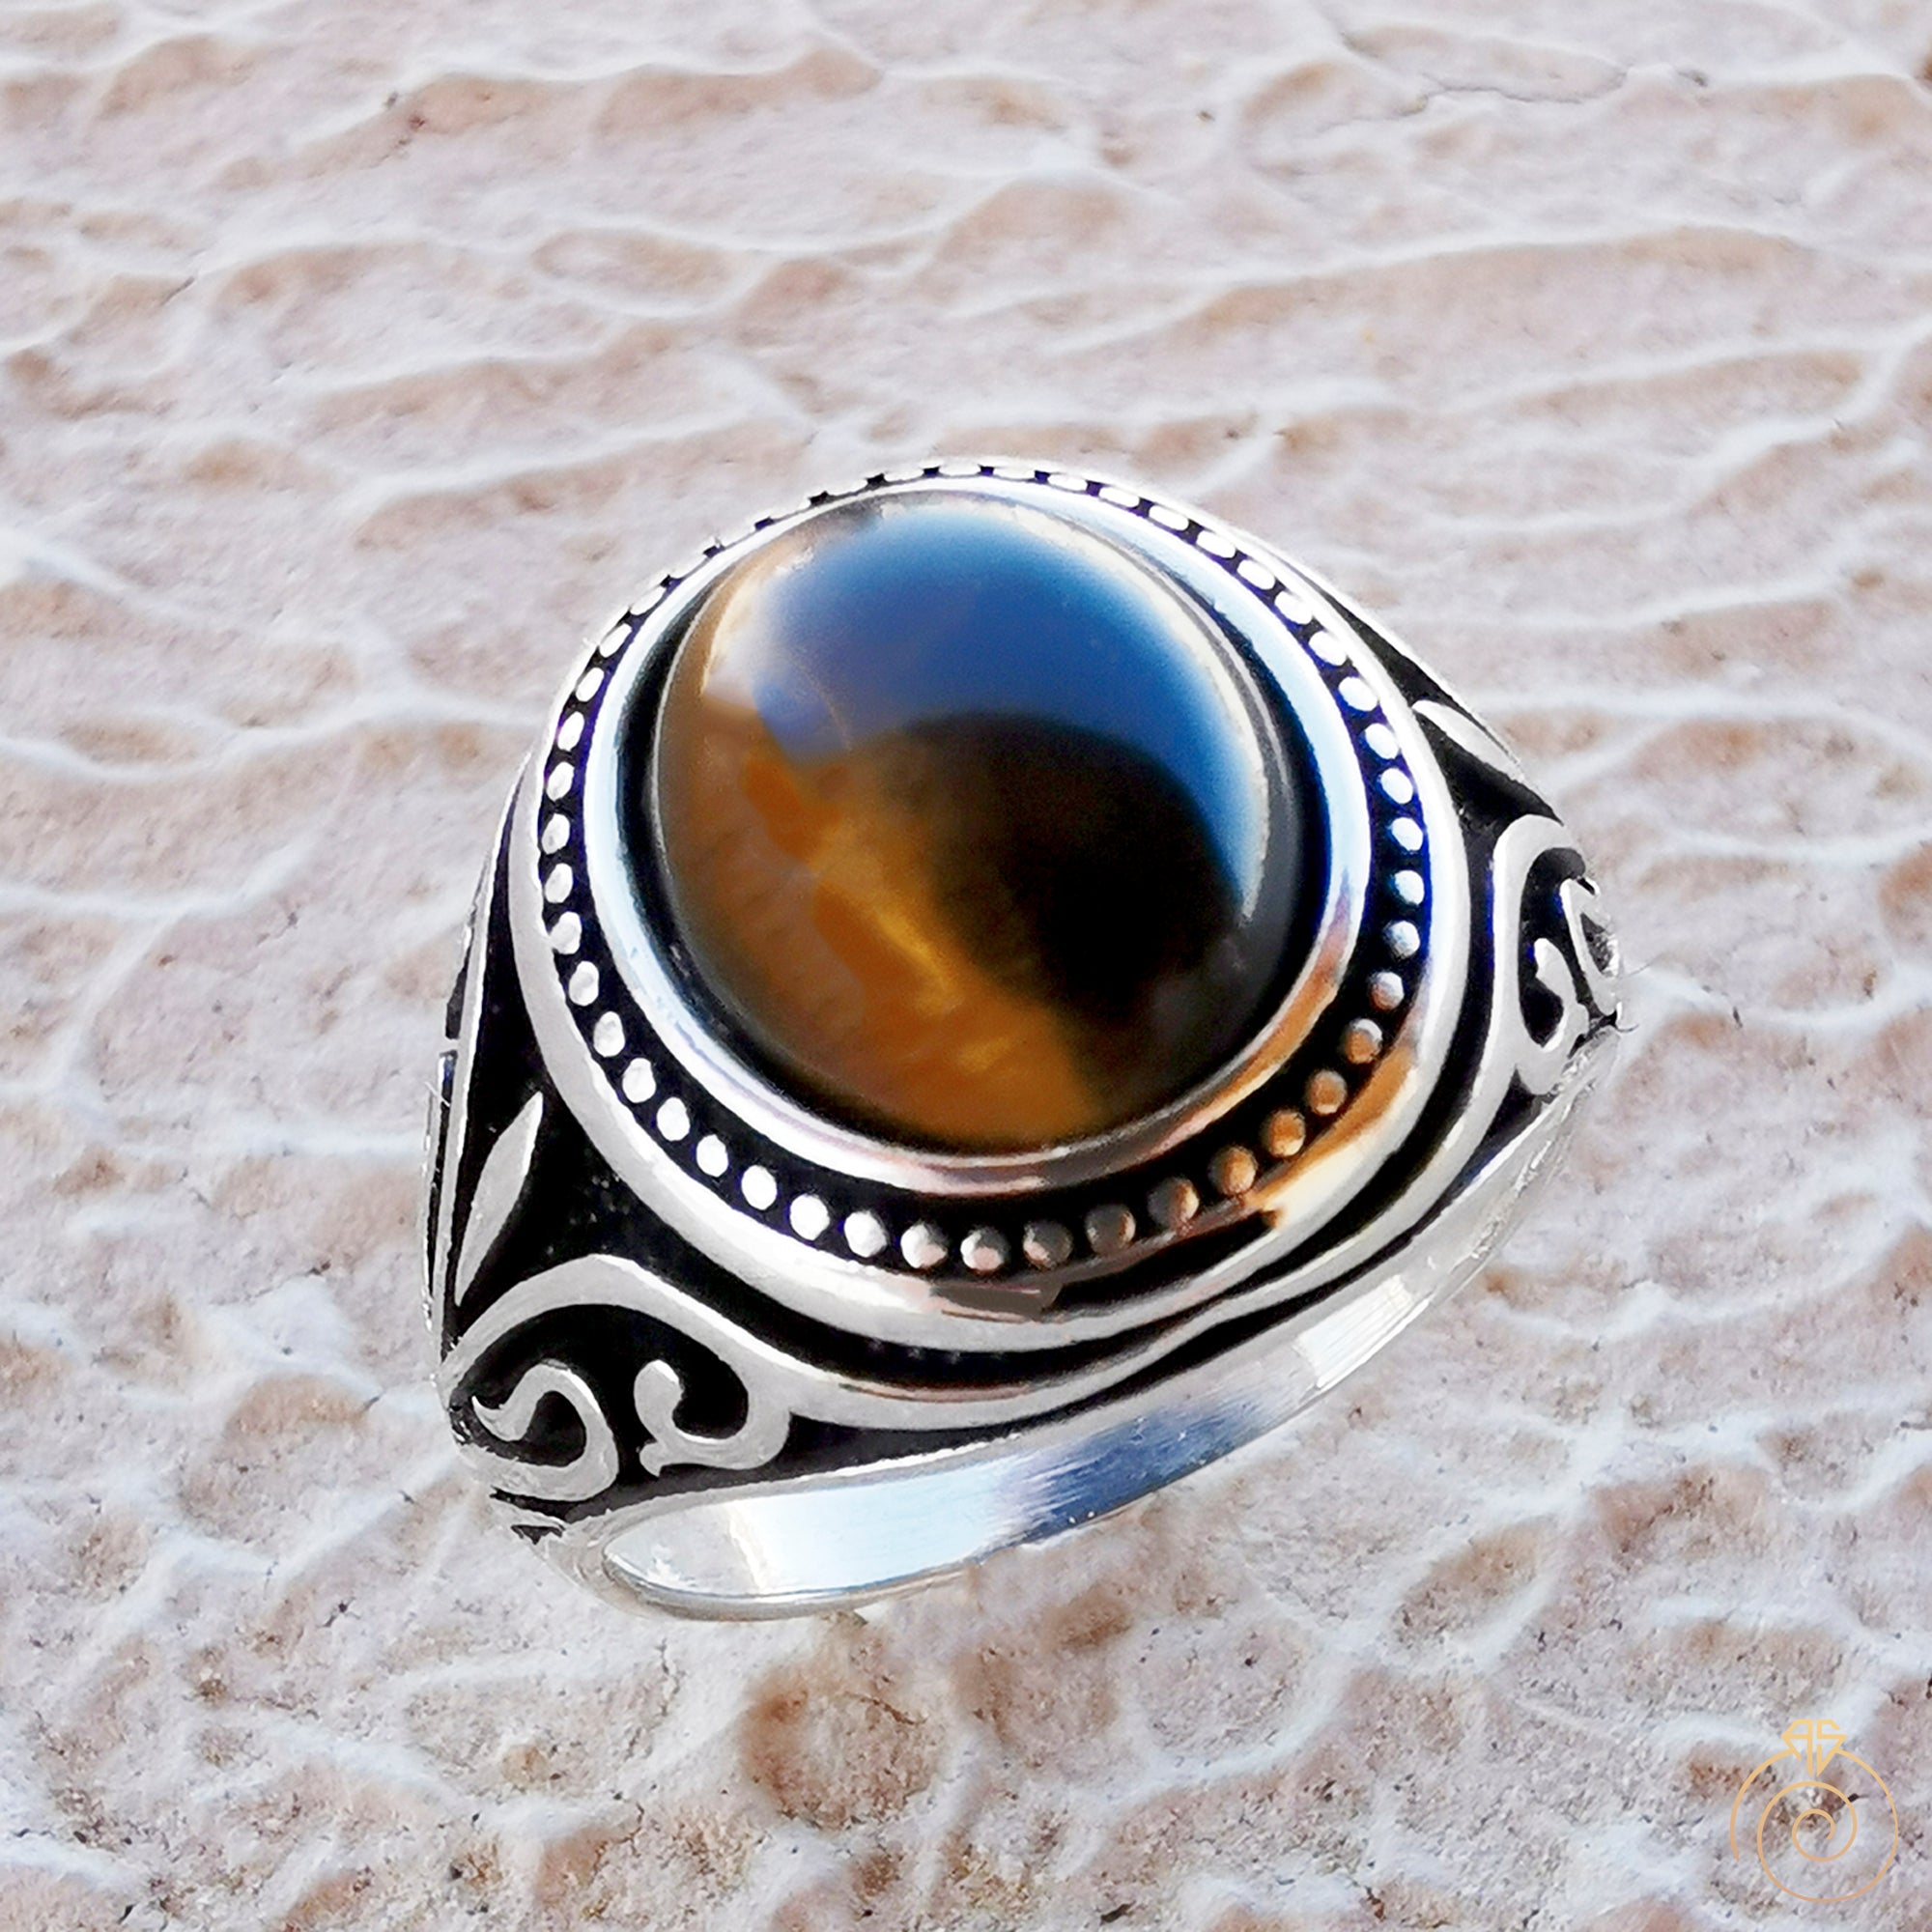 Buy SIDHGEMS 7.00 Carat Natural Tiger Eye Silver Ring Original Certified Tiger's  Eye Ring Oval Cut Gemstone Astrological Silver Plated Ring at Amazon.in